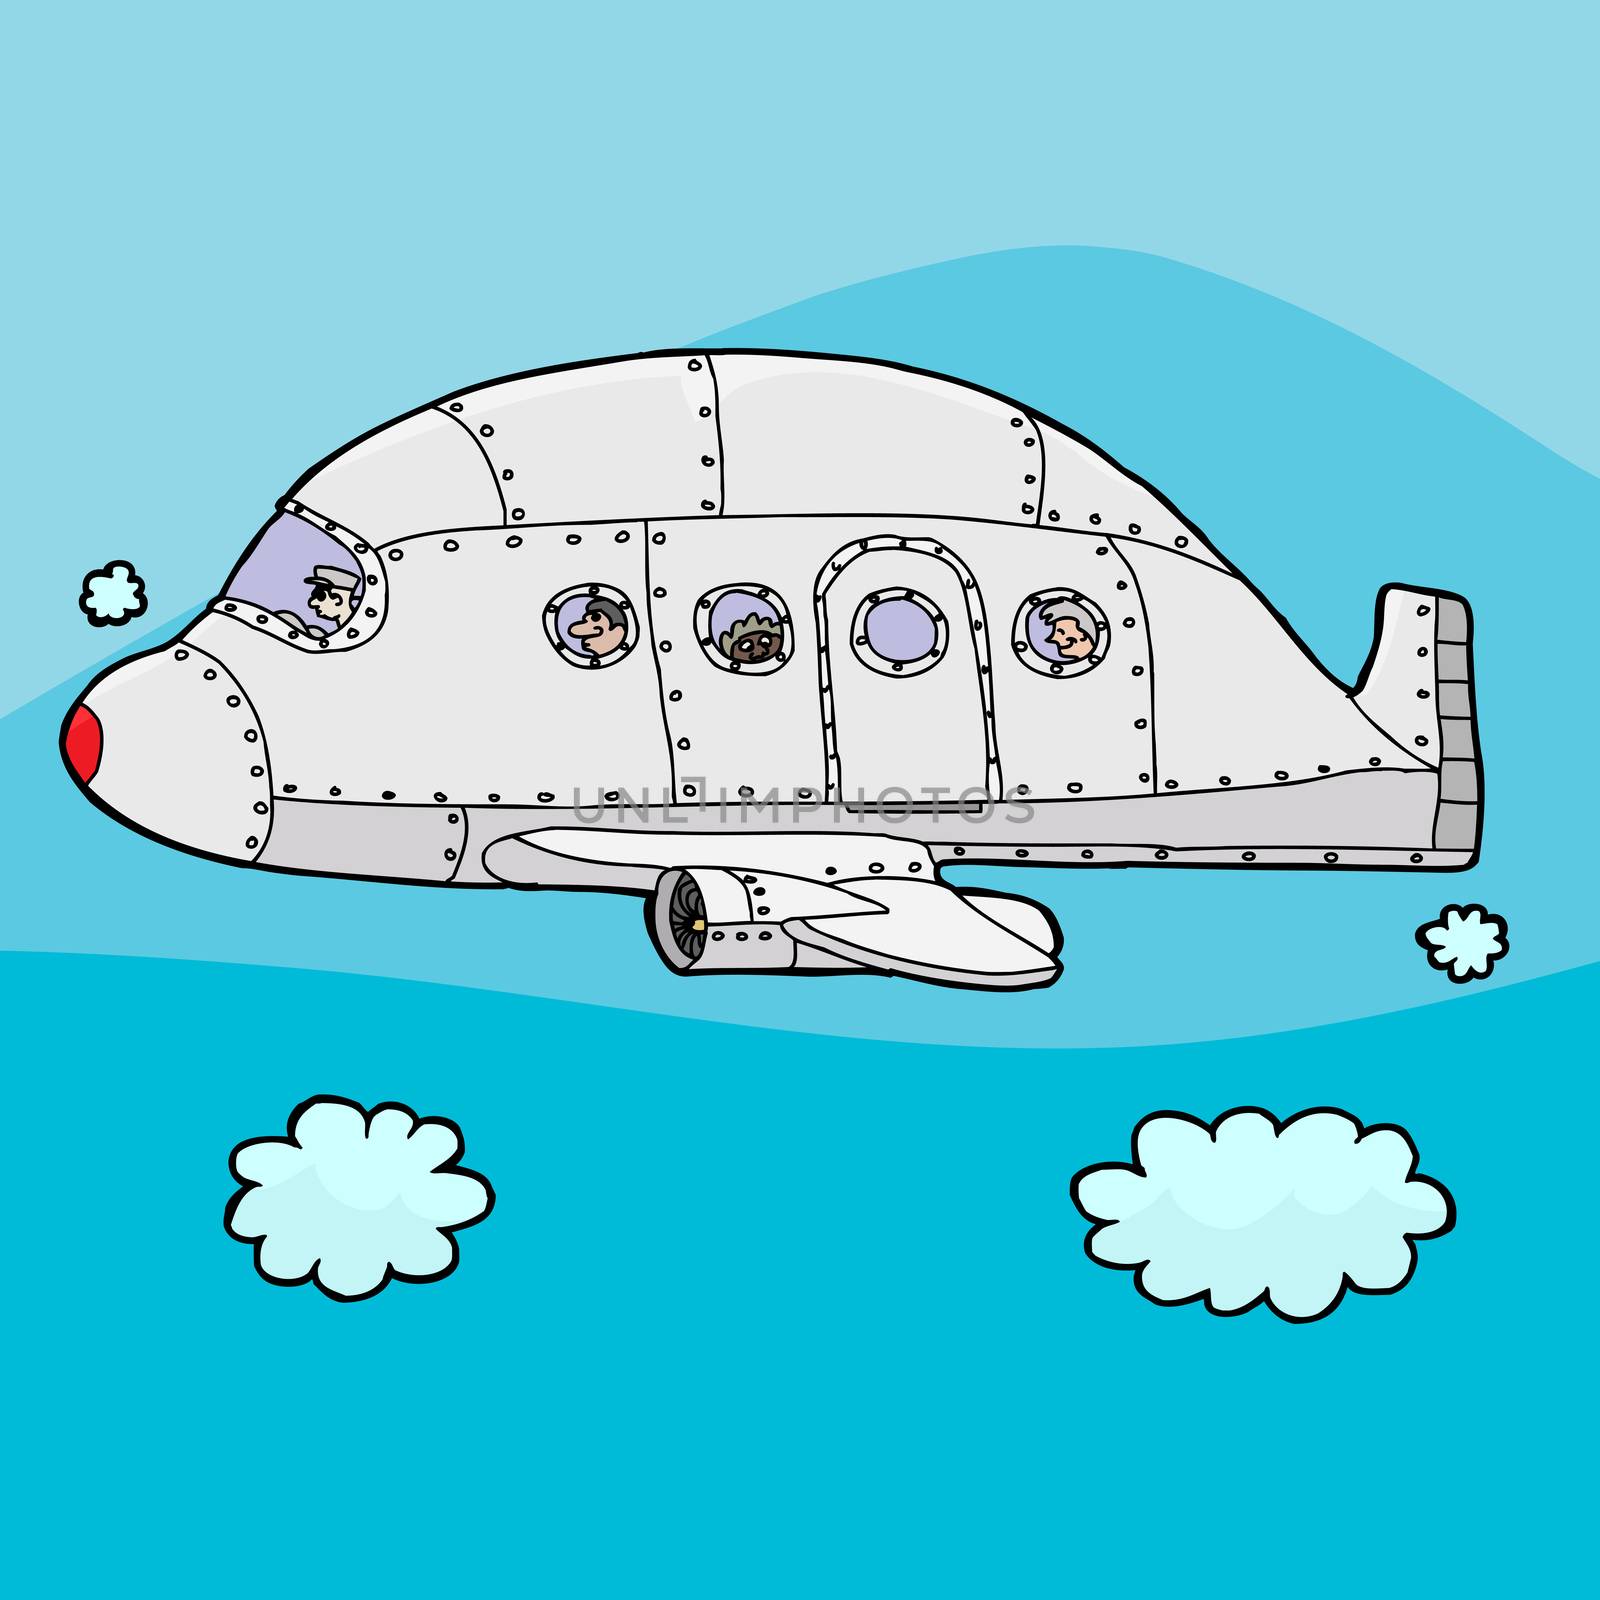 Cartoon airplane with passengers inside above the clouds